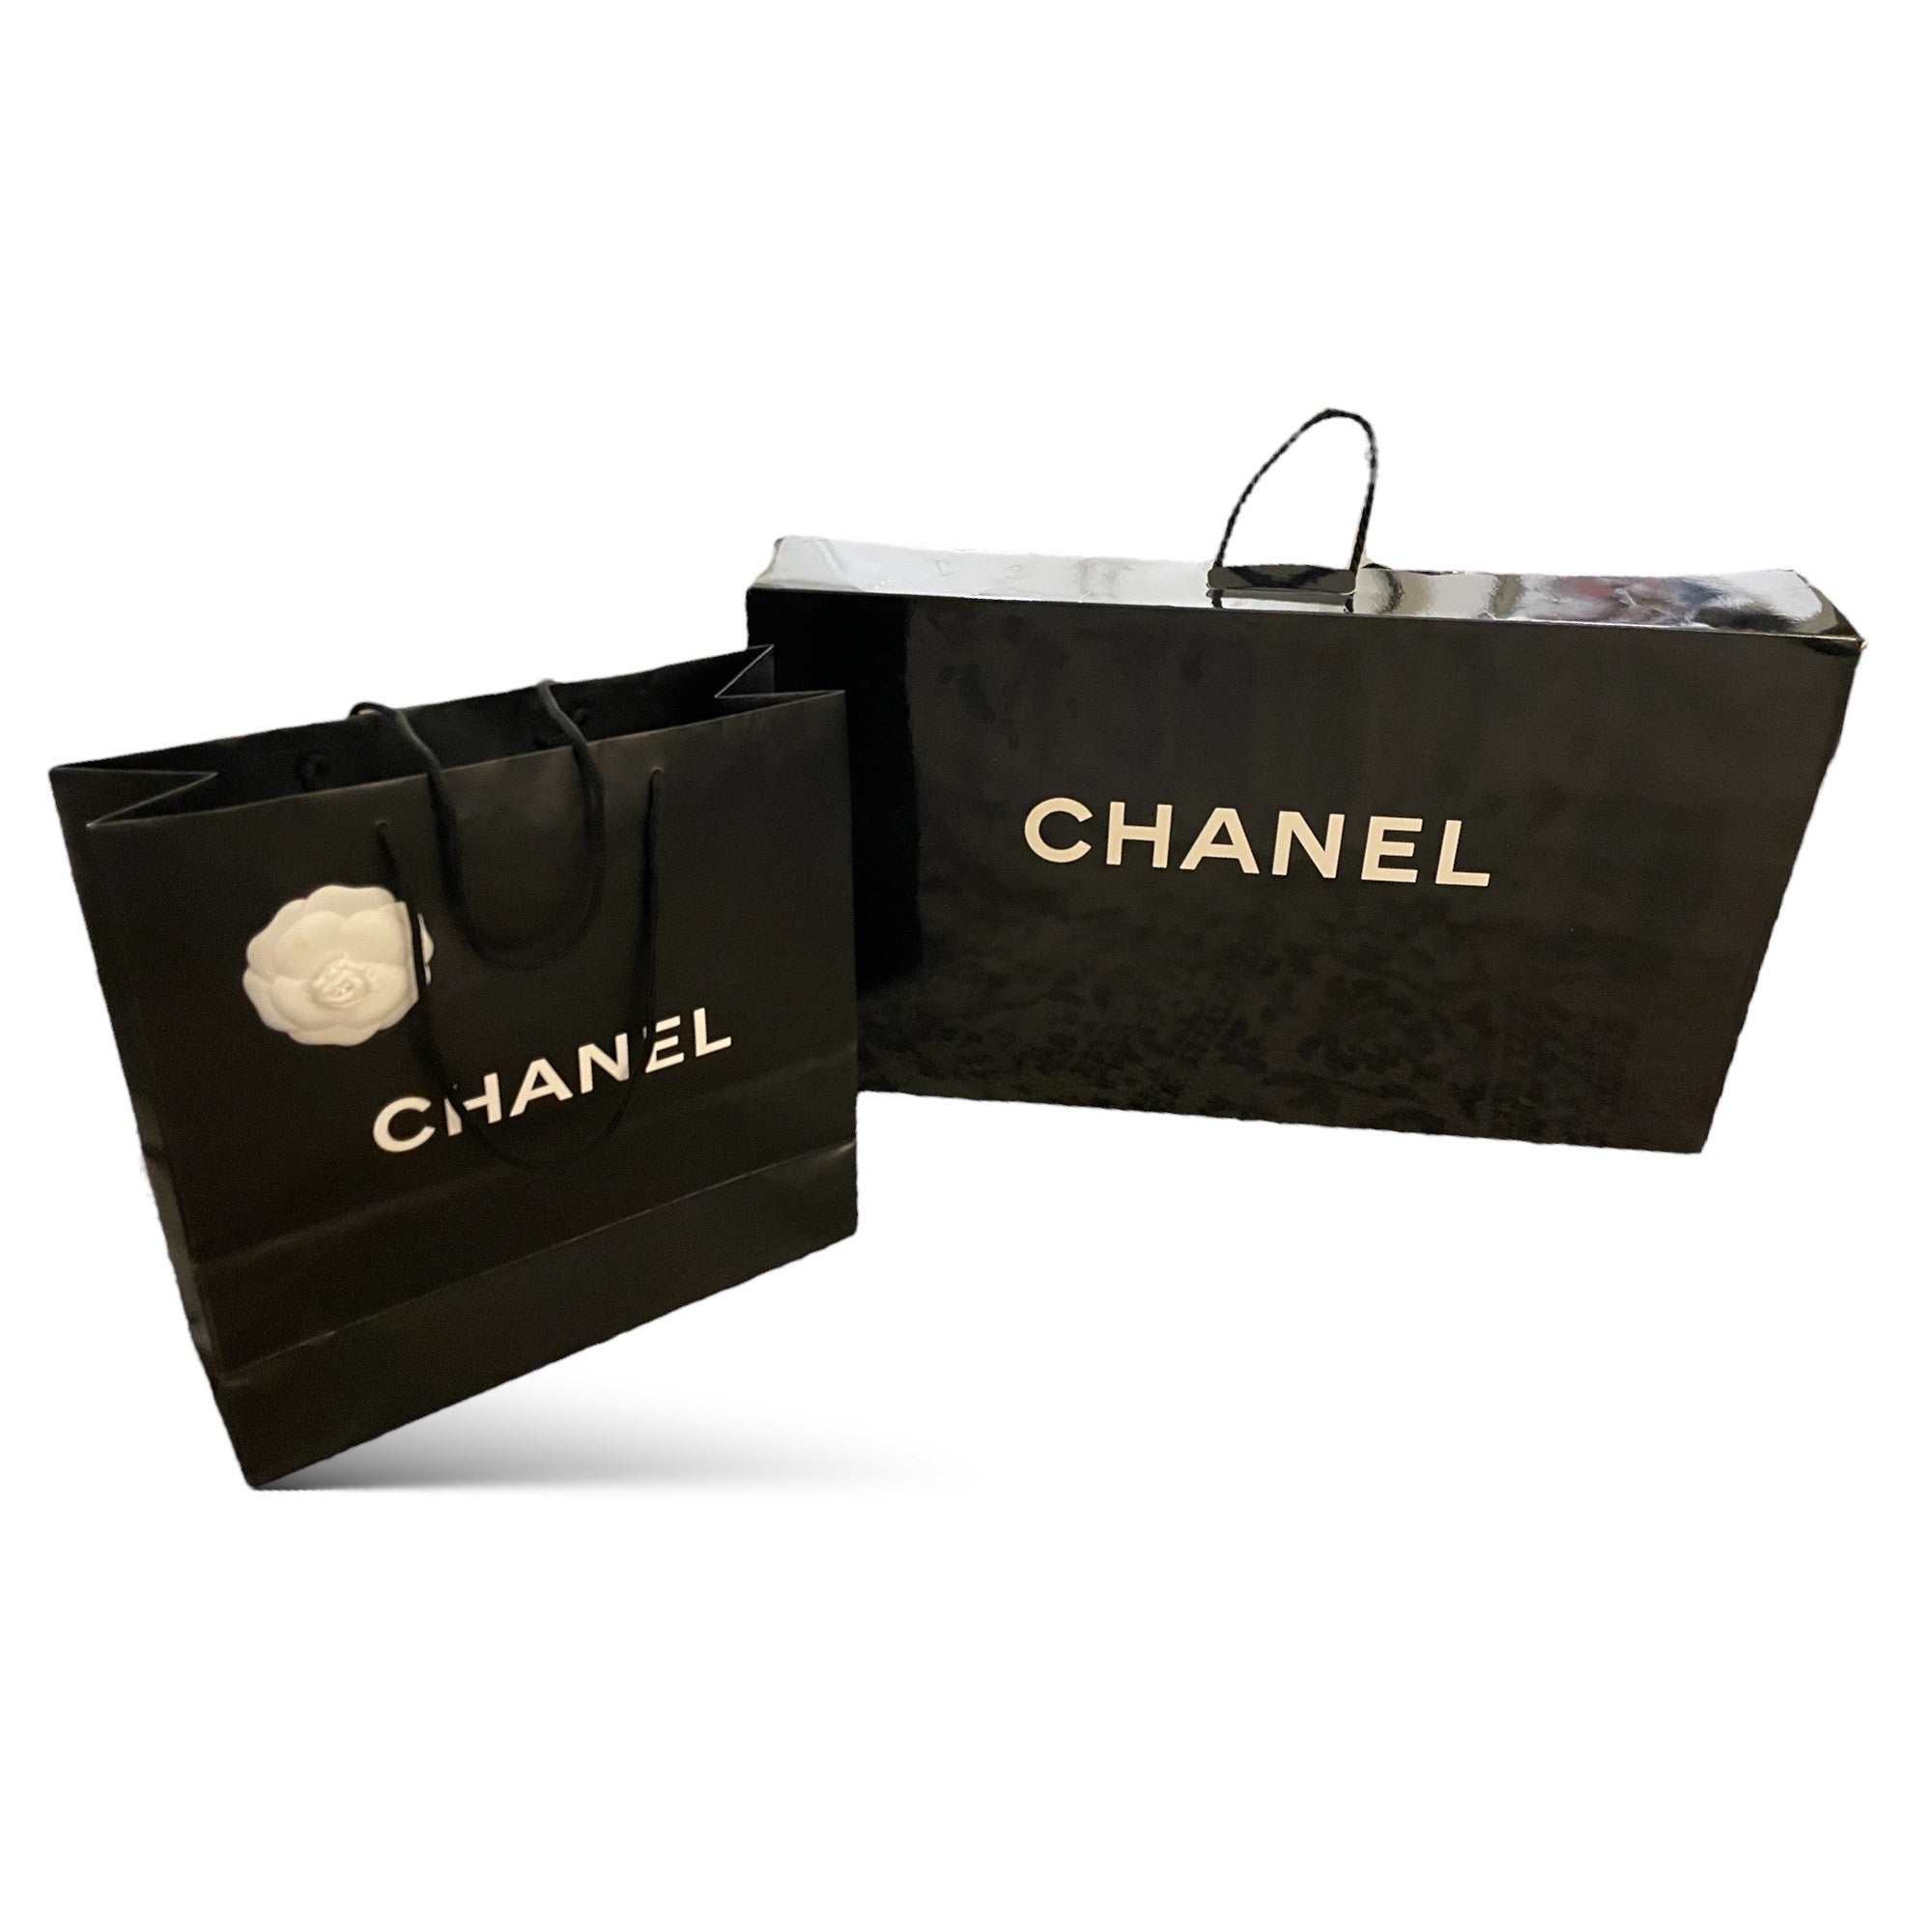 9 AUTHENTIC Large CHANEL Shopping Bag Lot with Box Bag & Camilla Flower